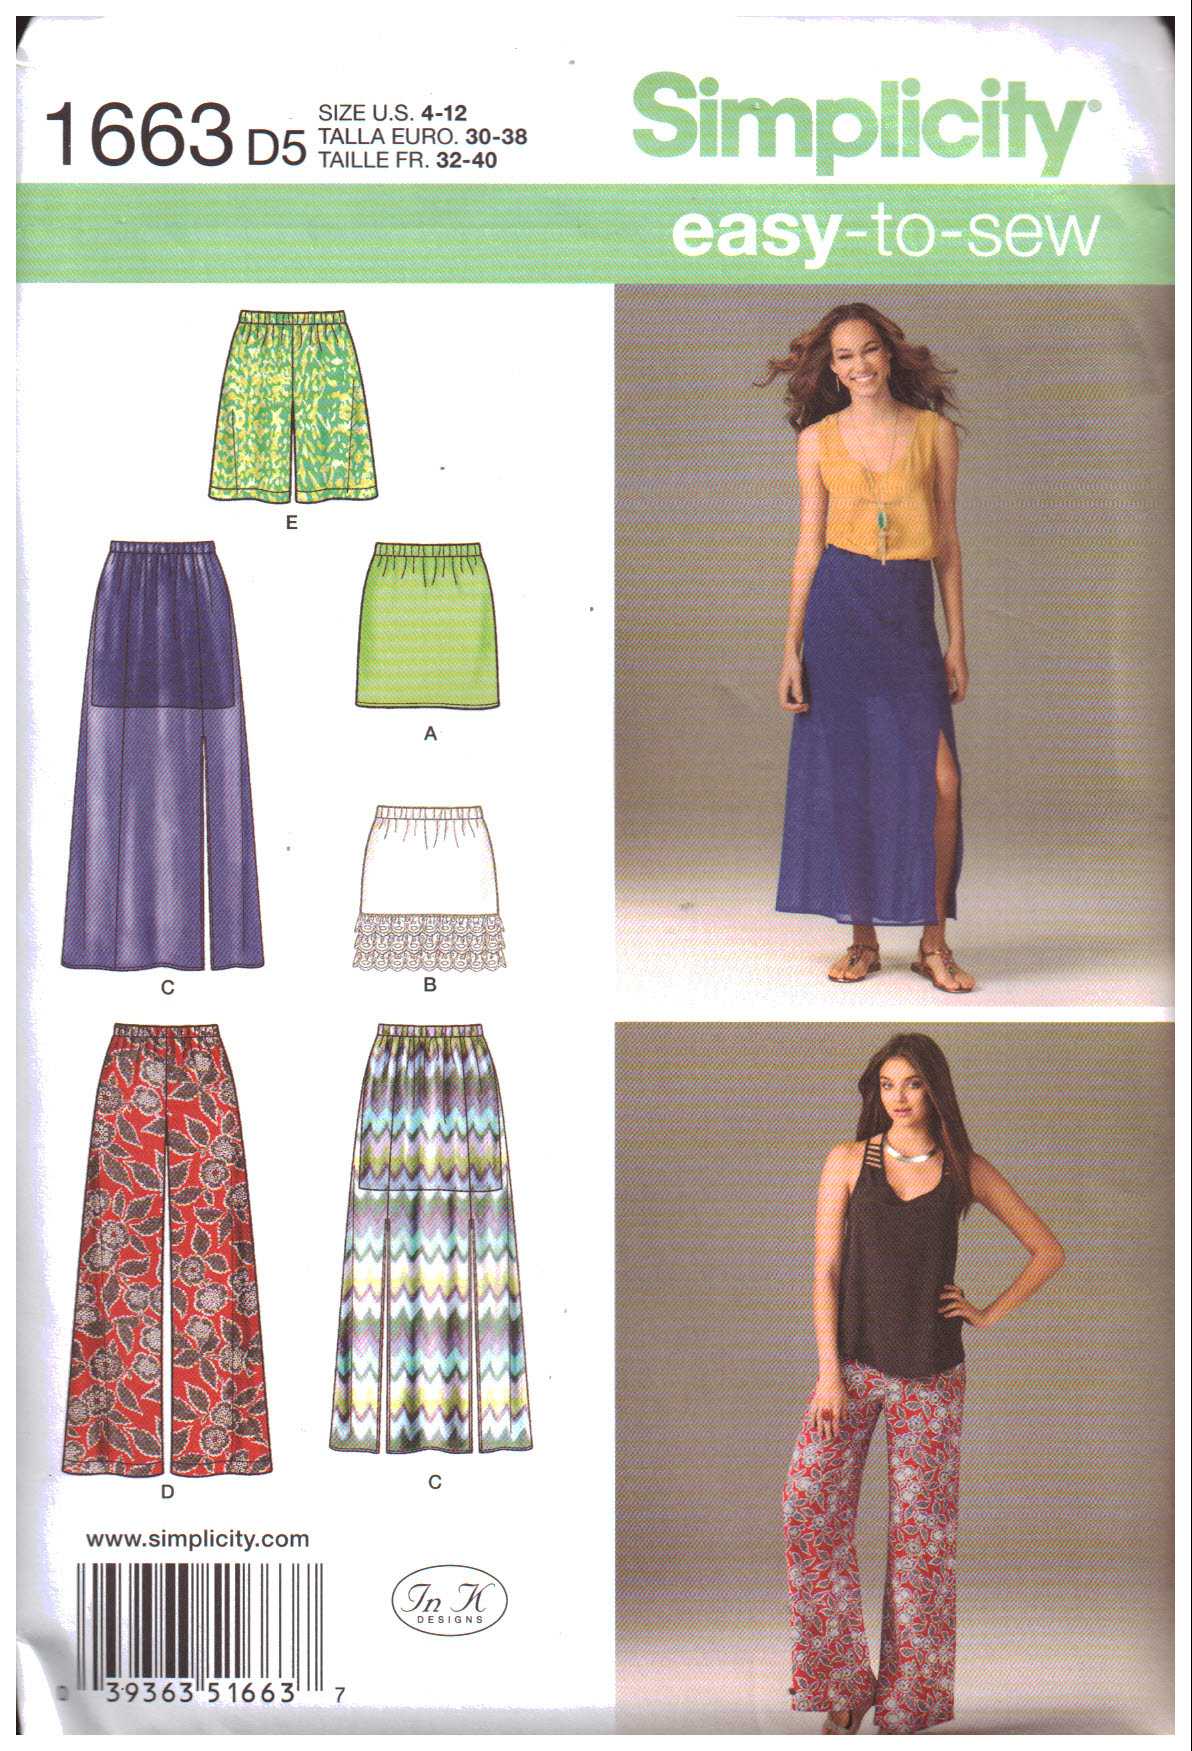 Simplicity 1663 Pull-on Pants, Skirt, Shorts Size: D5 4-12 or P5 12-20 ...